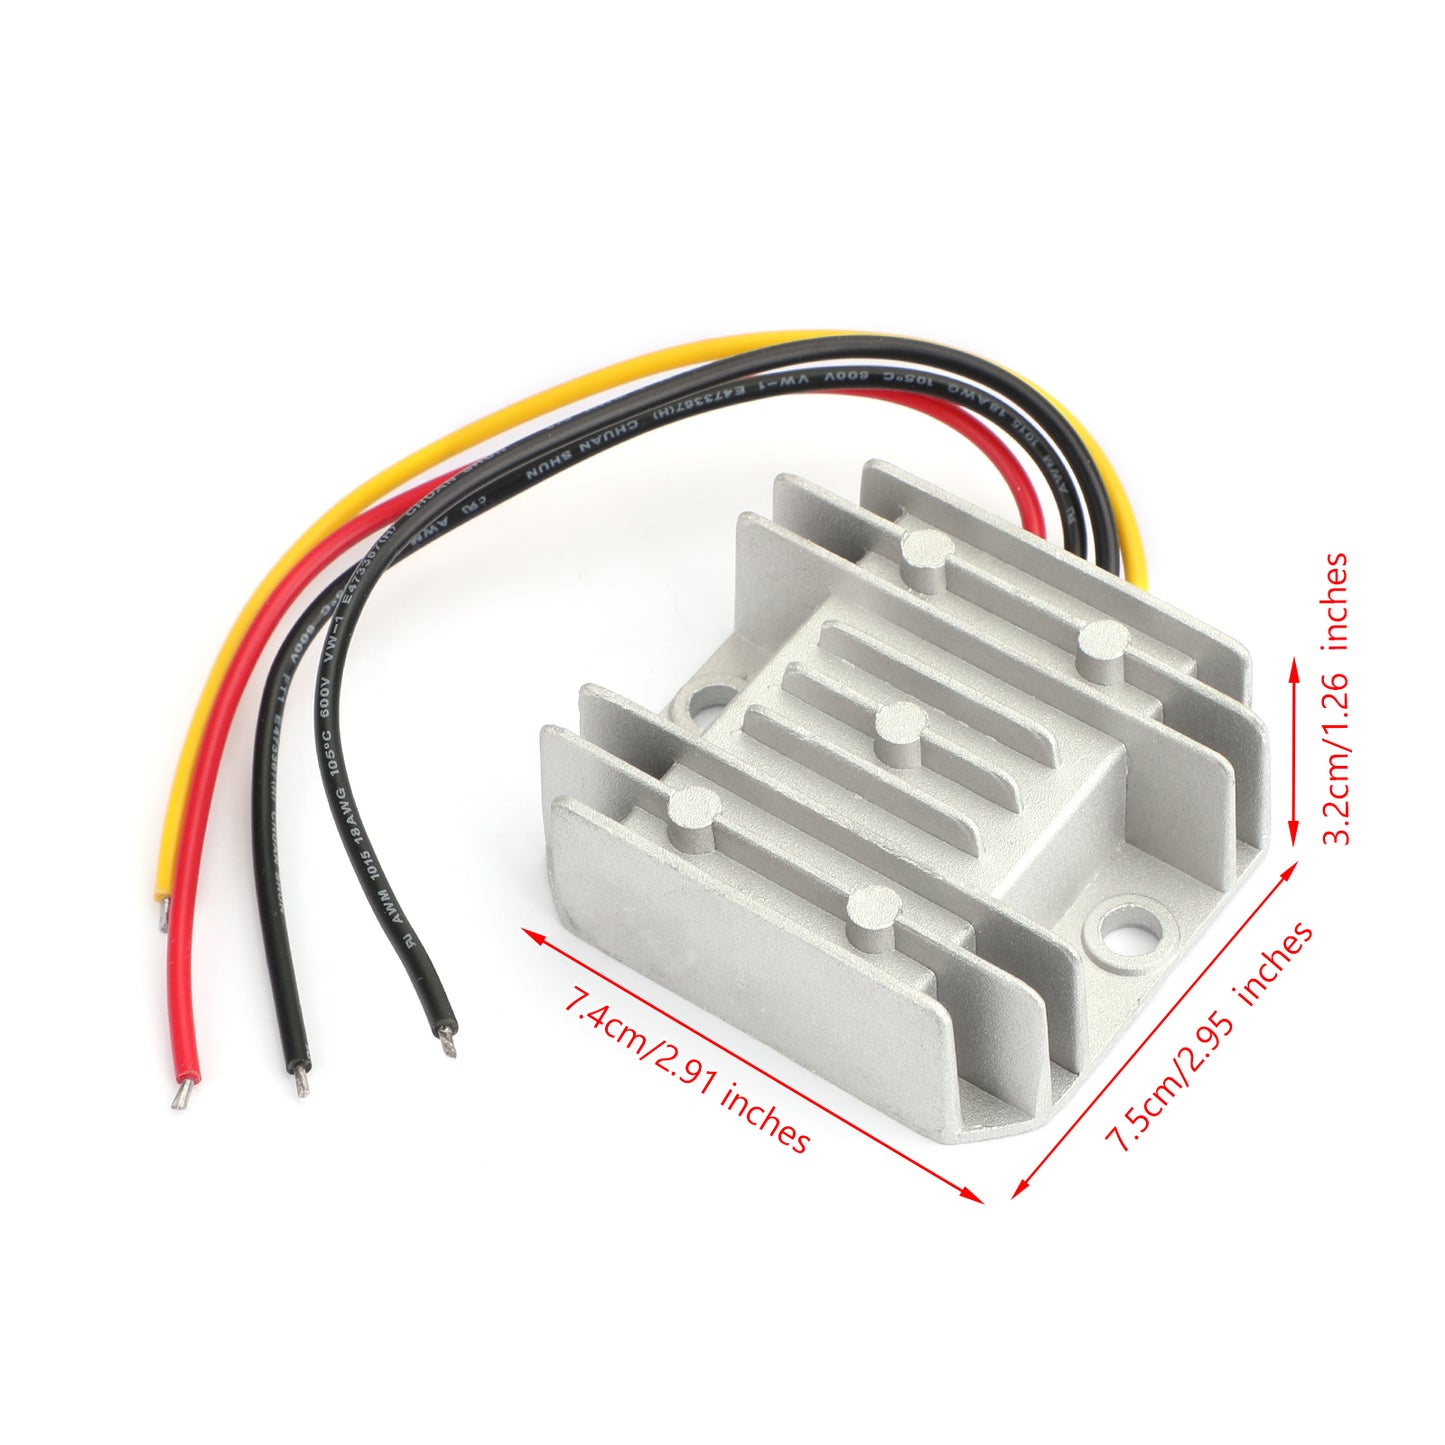 12V Auf 24V DC-DC Step Up Boost Spannungswandler 3A 72W Industrie-Netzteile